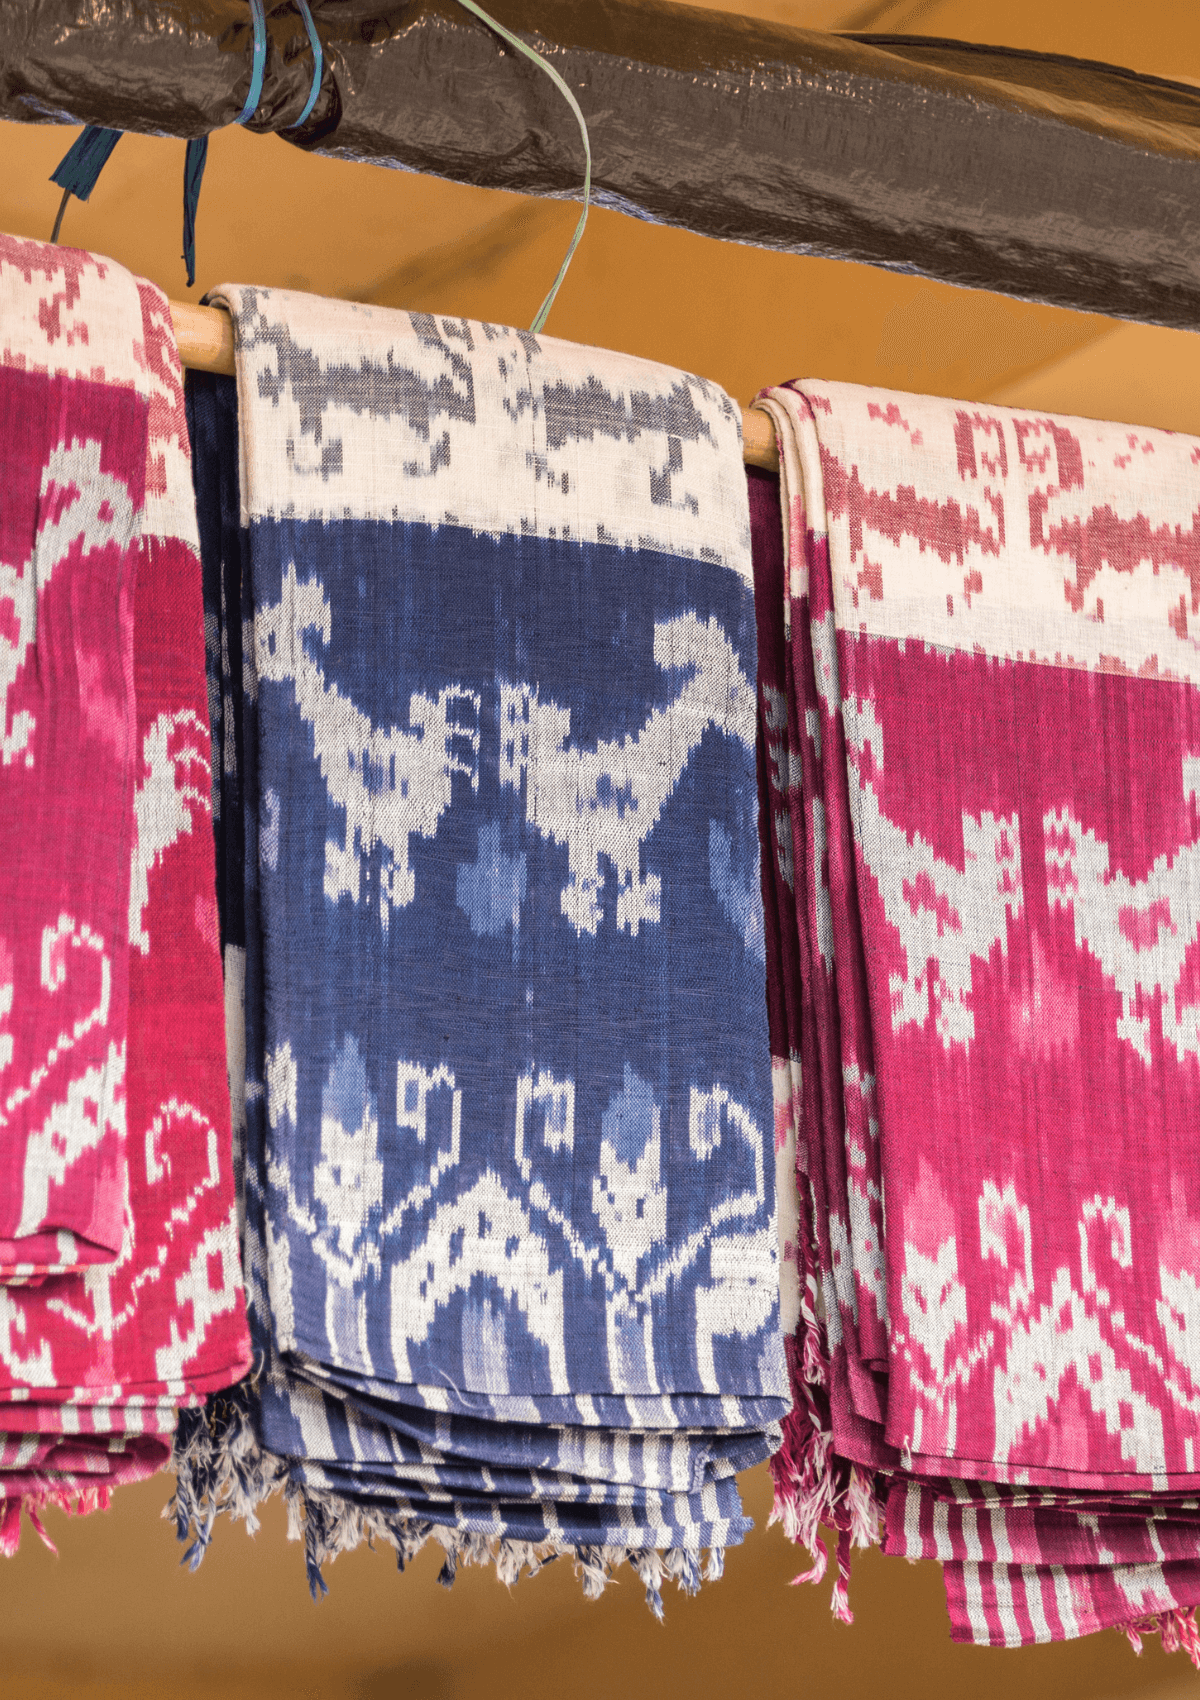 Ikat fabrics are some of the best souvenirs from Indonesia to take basck home